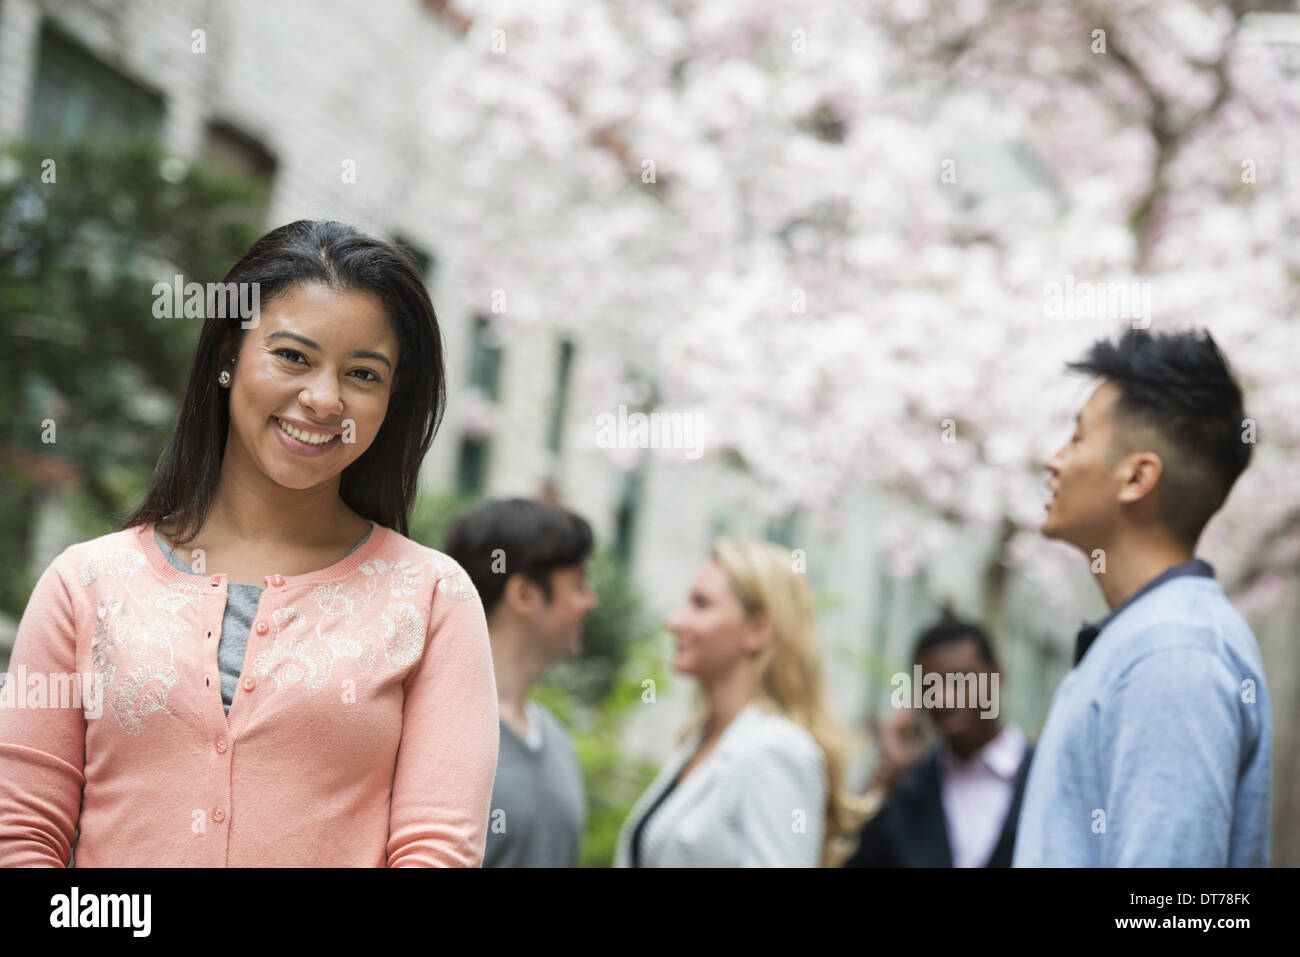 City life in spring. Young people outdoors in a city park. A woman in a pink shirt with four people in the background. Stock Photo